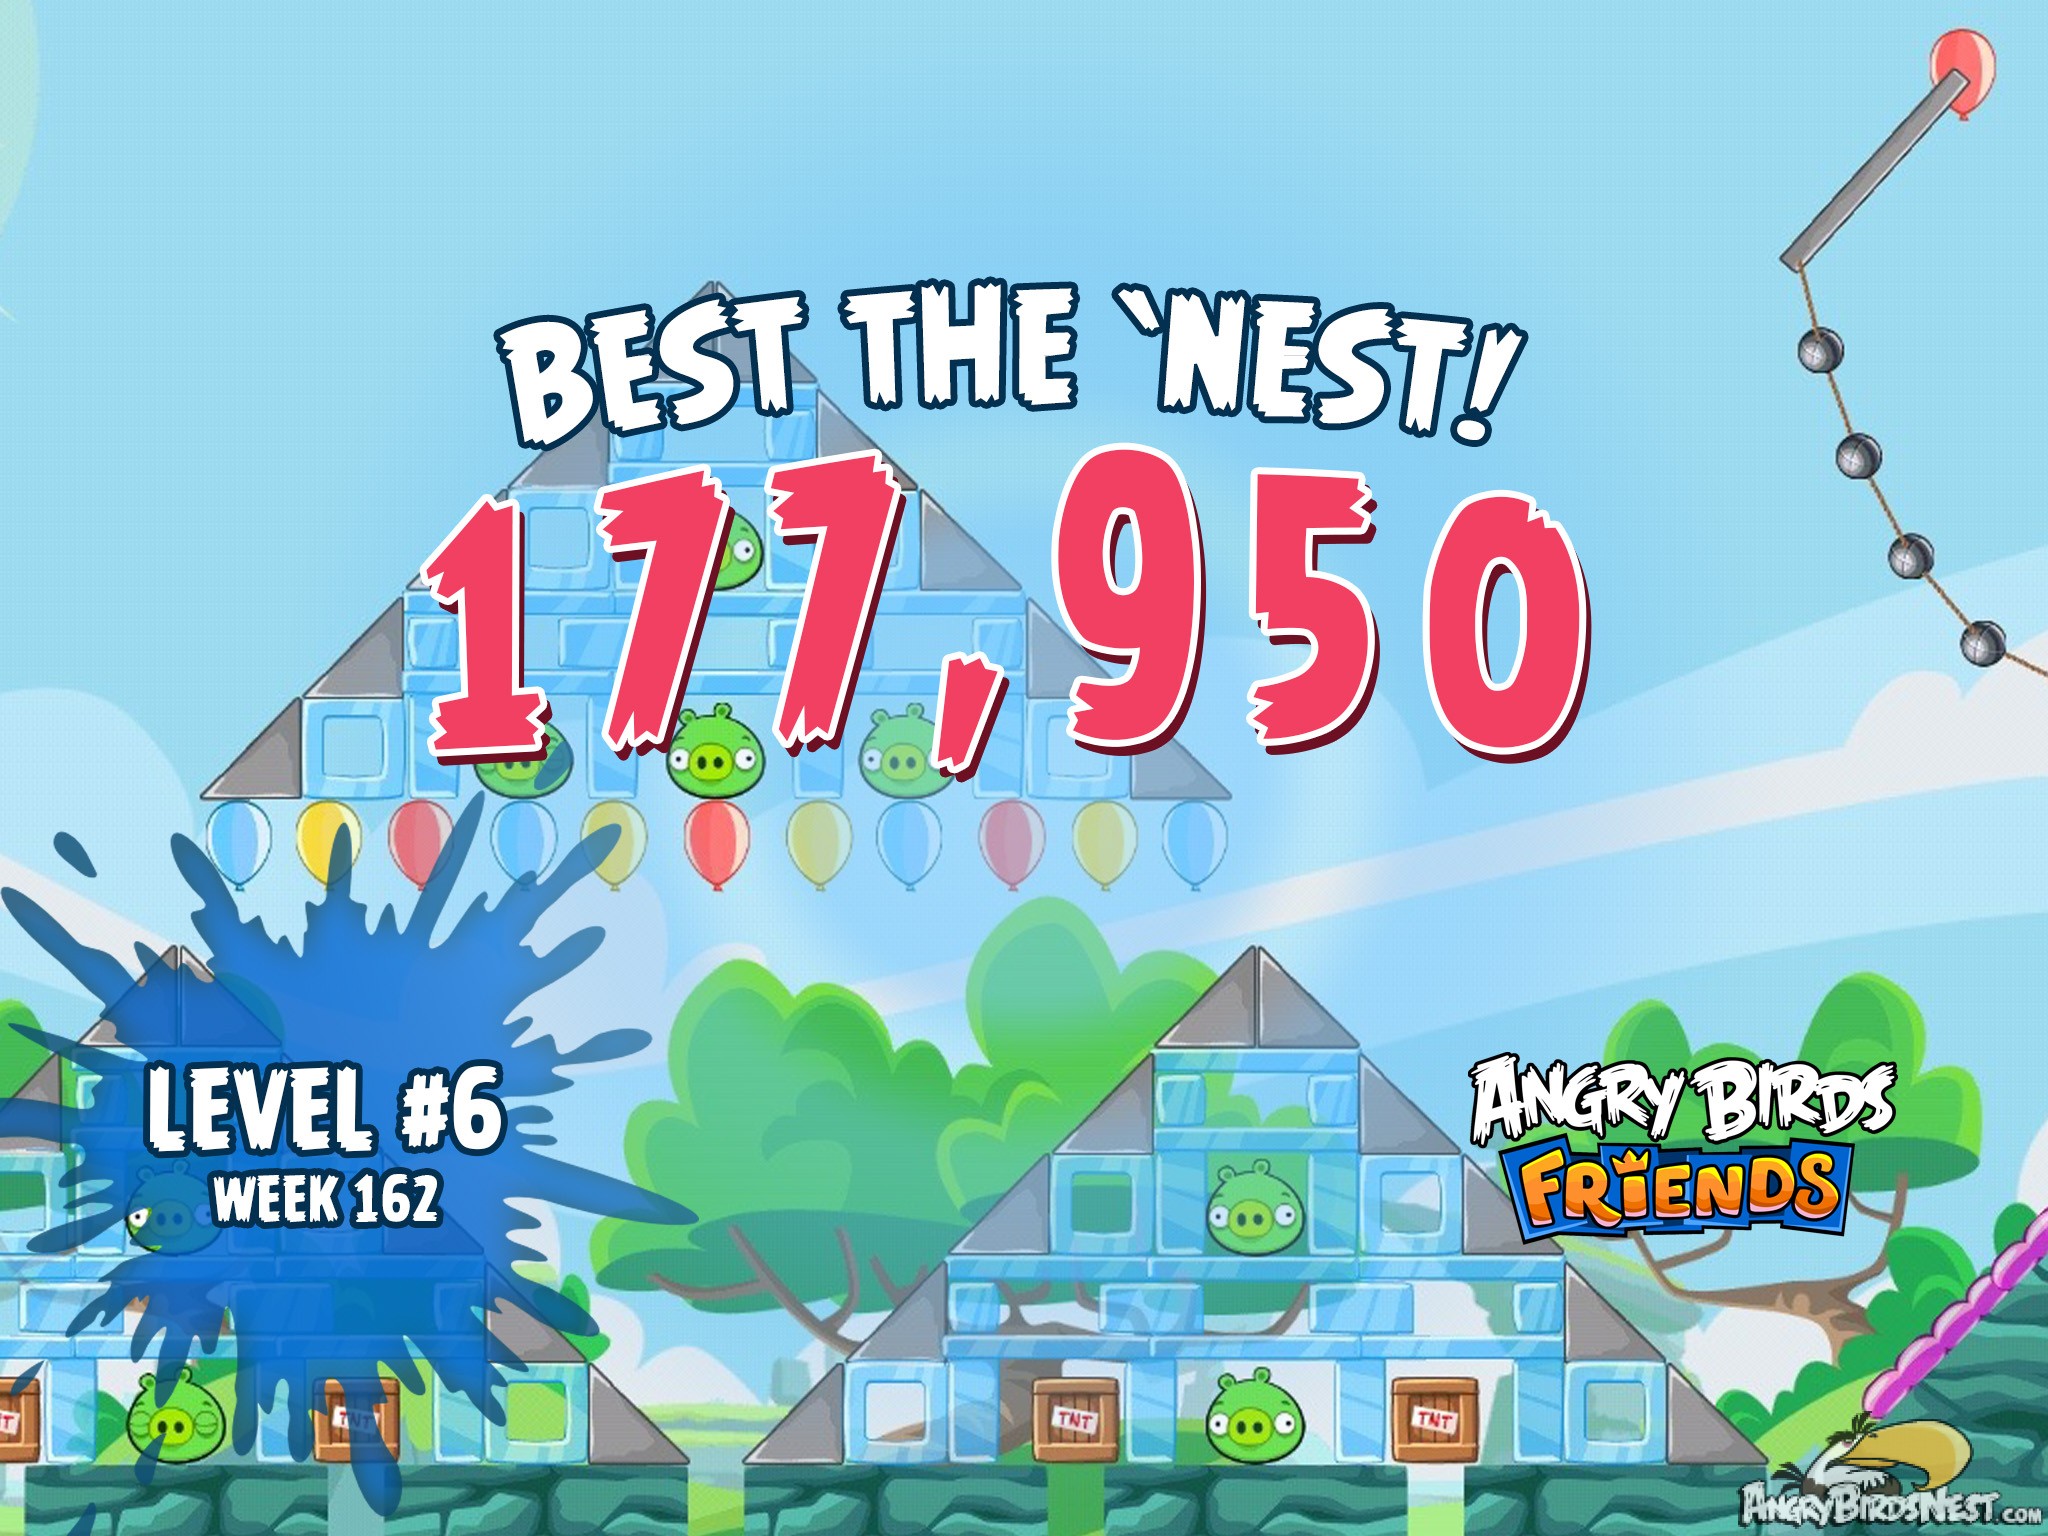 Angry Birds Friends Best the Nest Challenge Week 13